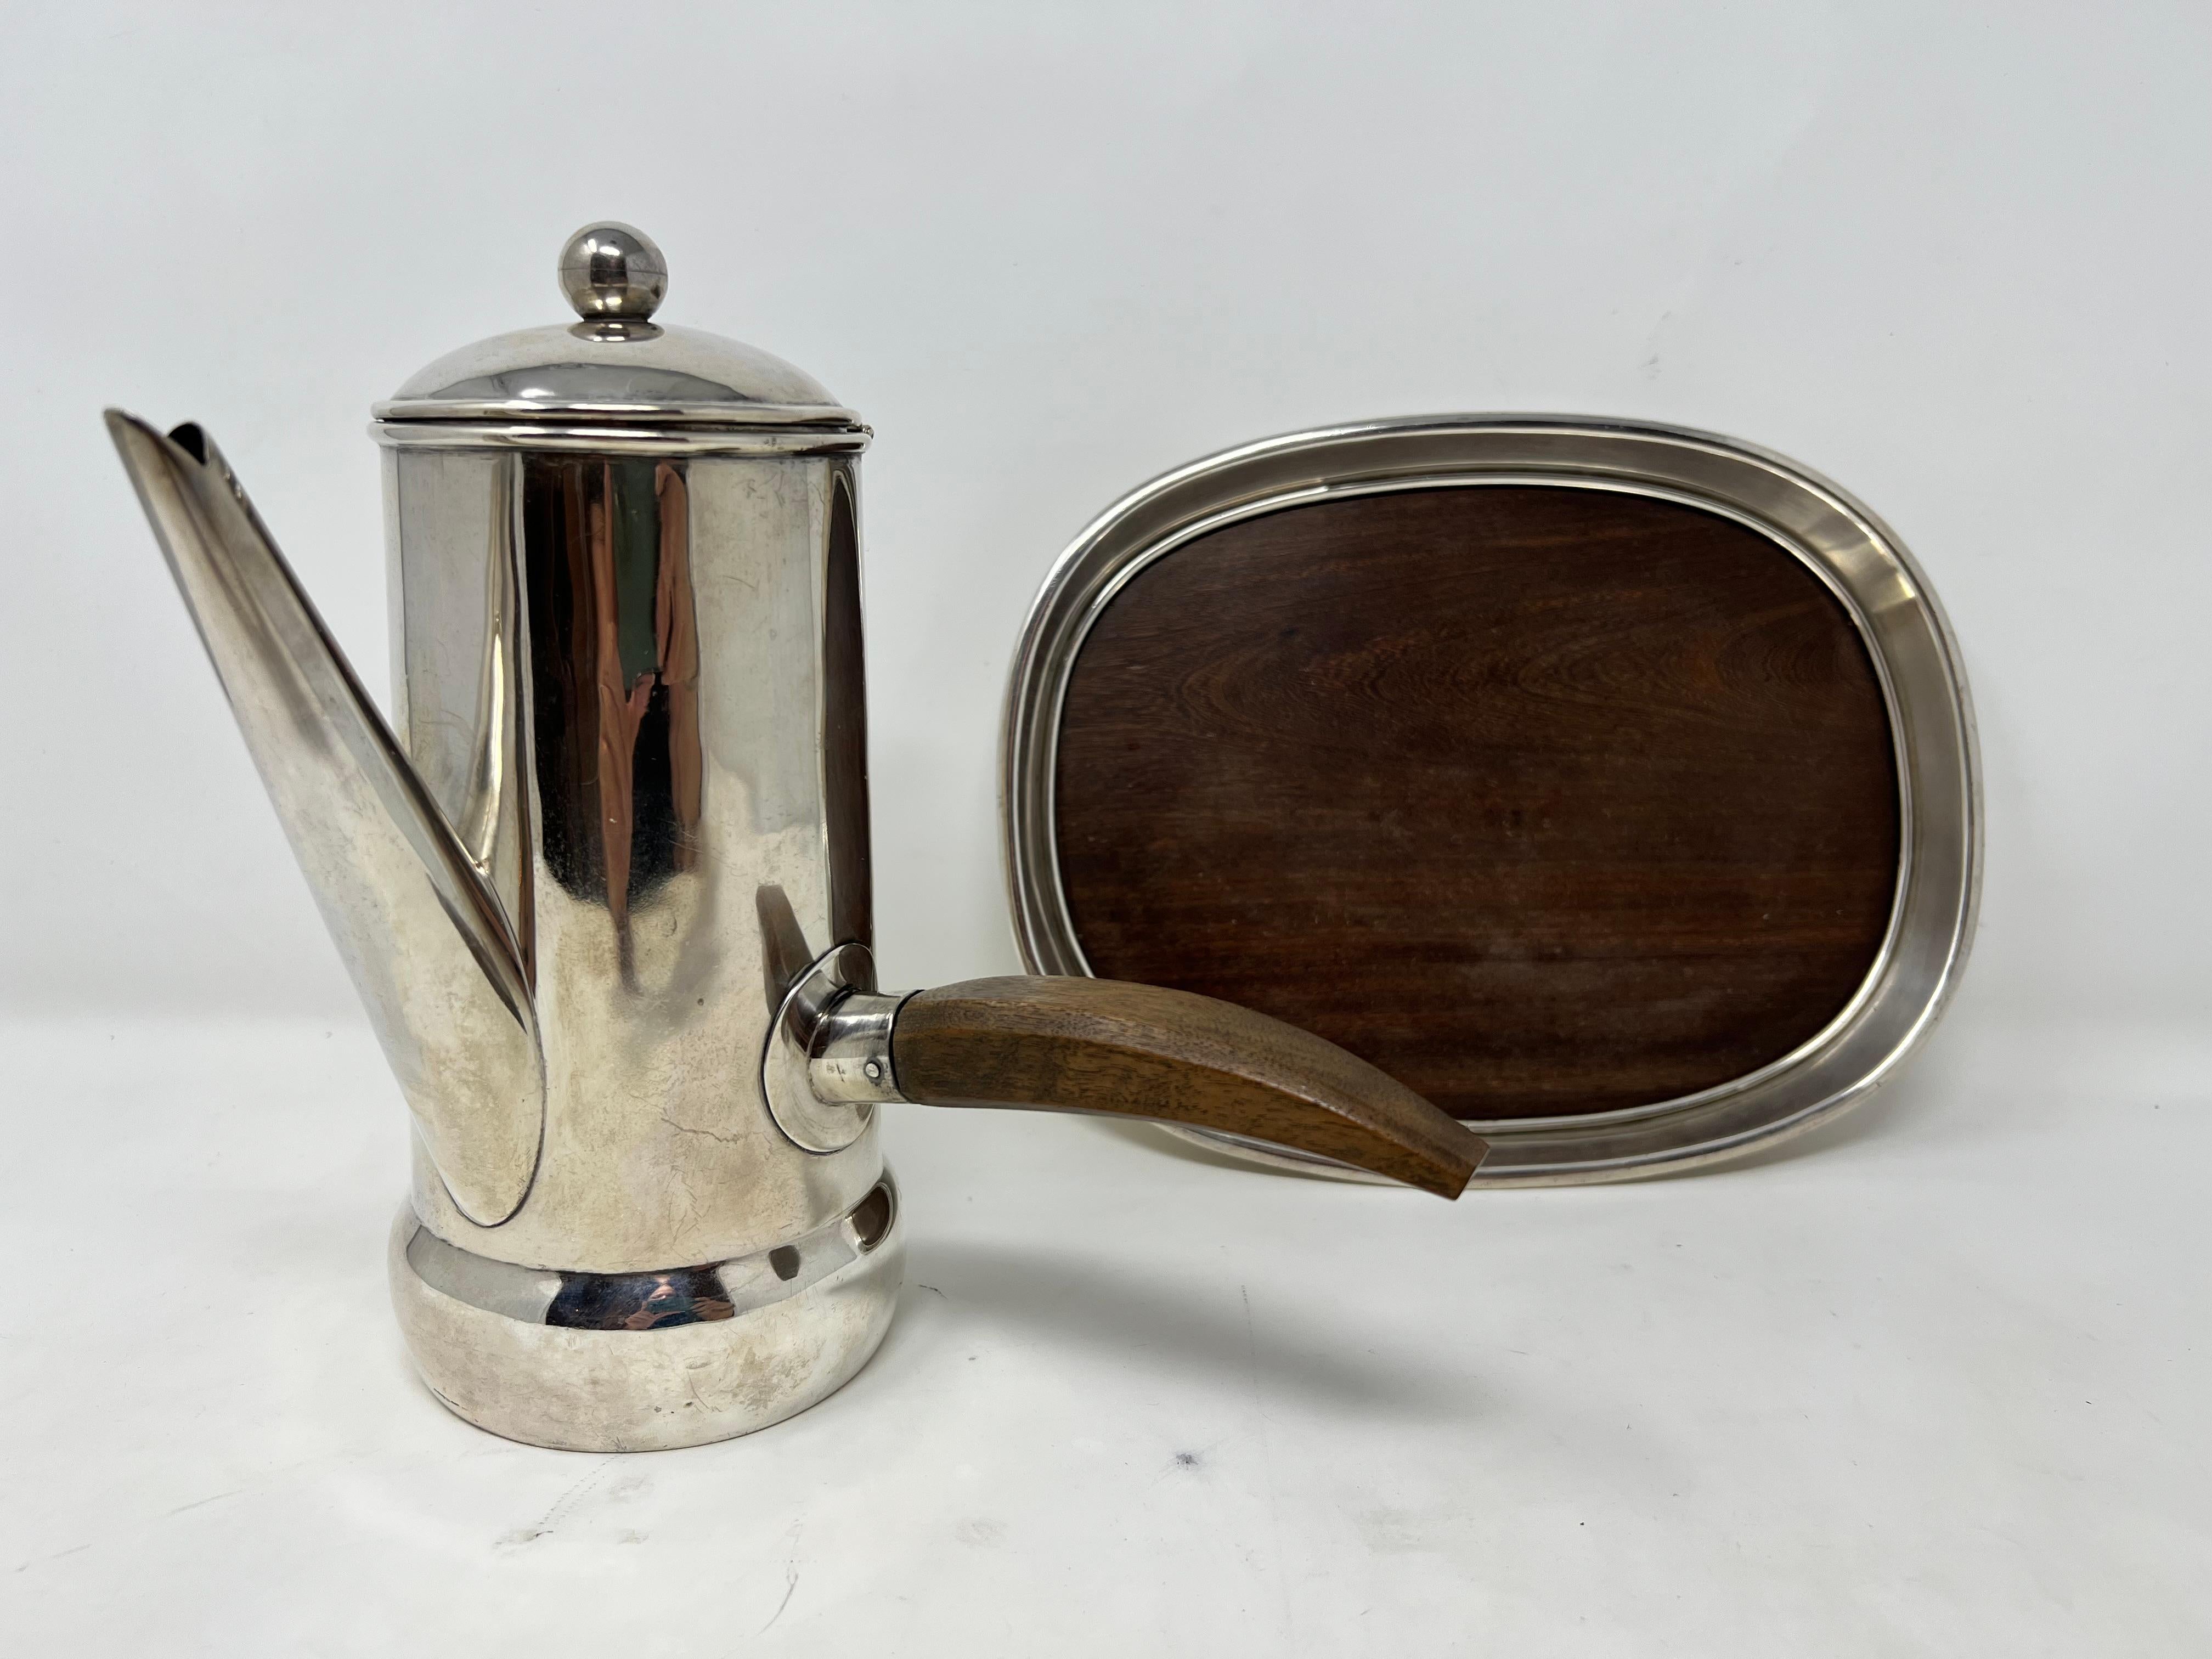 William Spratling Silver Coffee Pot and Serving Tray.
The tray measures 9 inches long, 4 inches wide and 1 inch high.